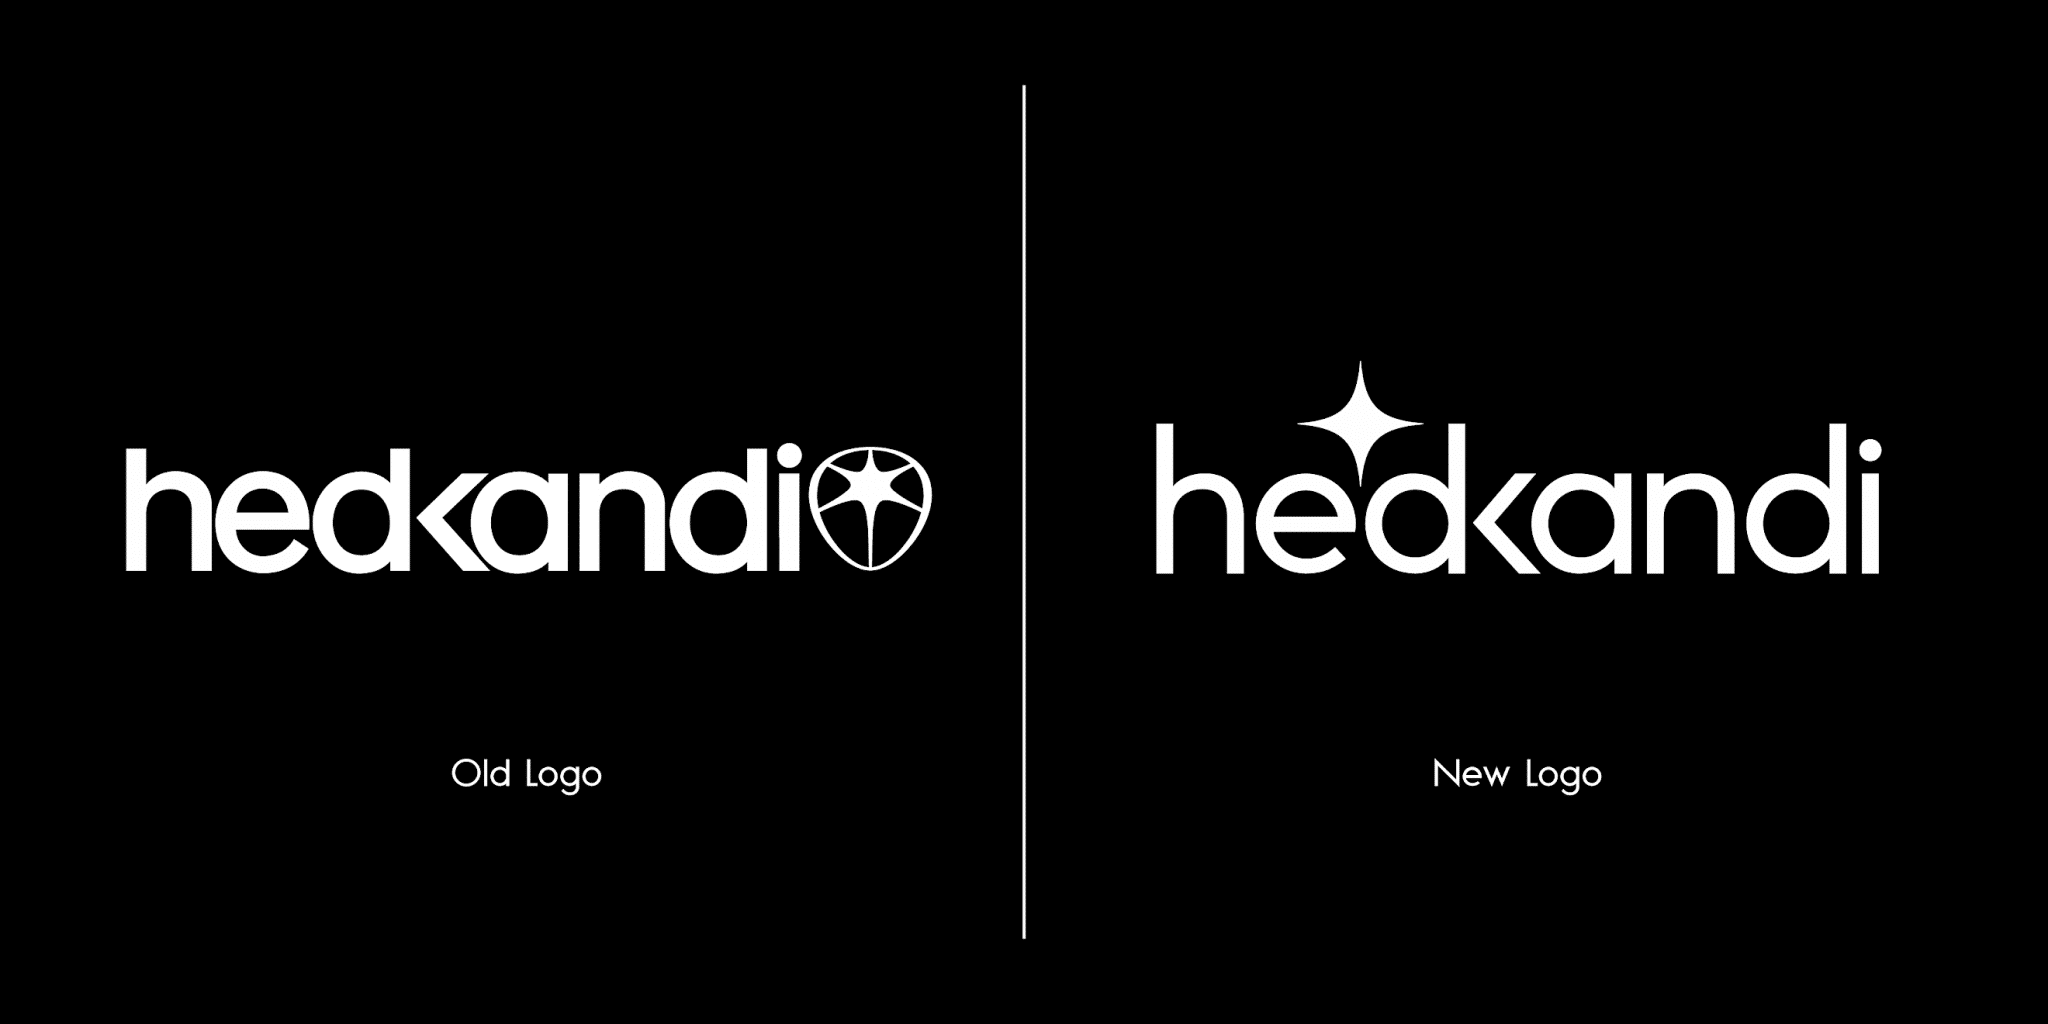 Hedkandi logos before and after.